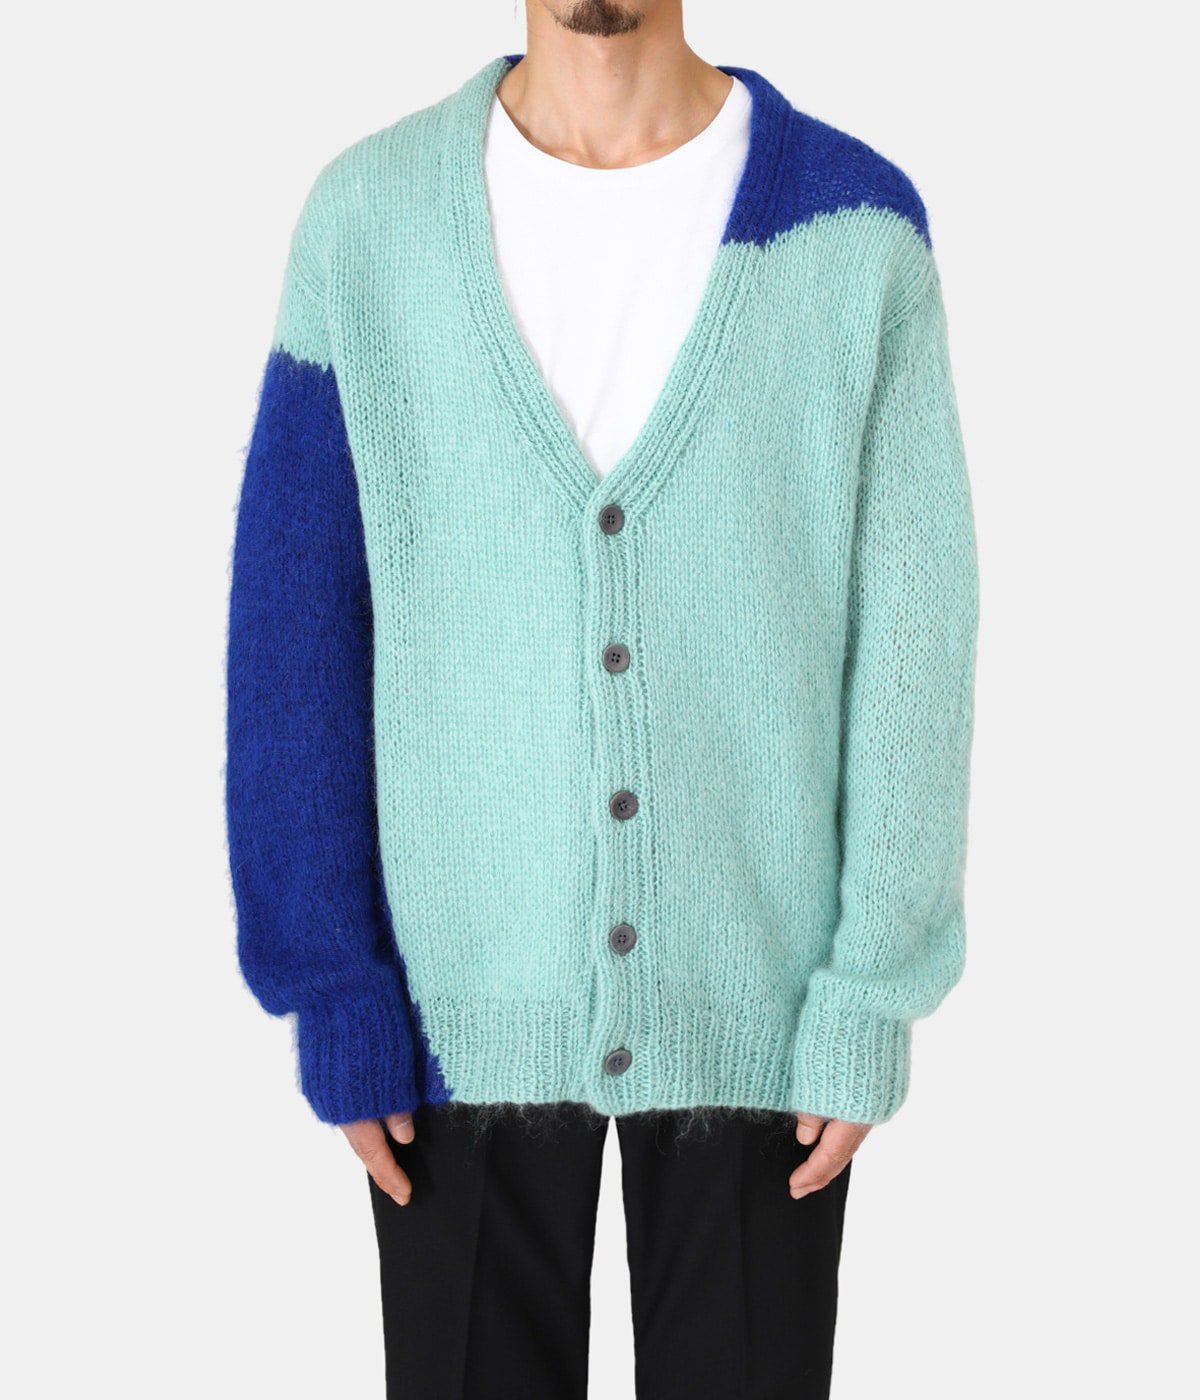 Hand Knitted Mohair Cardigan | NOMA t.d.(ノマ ティーディー